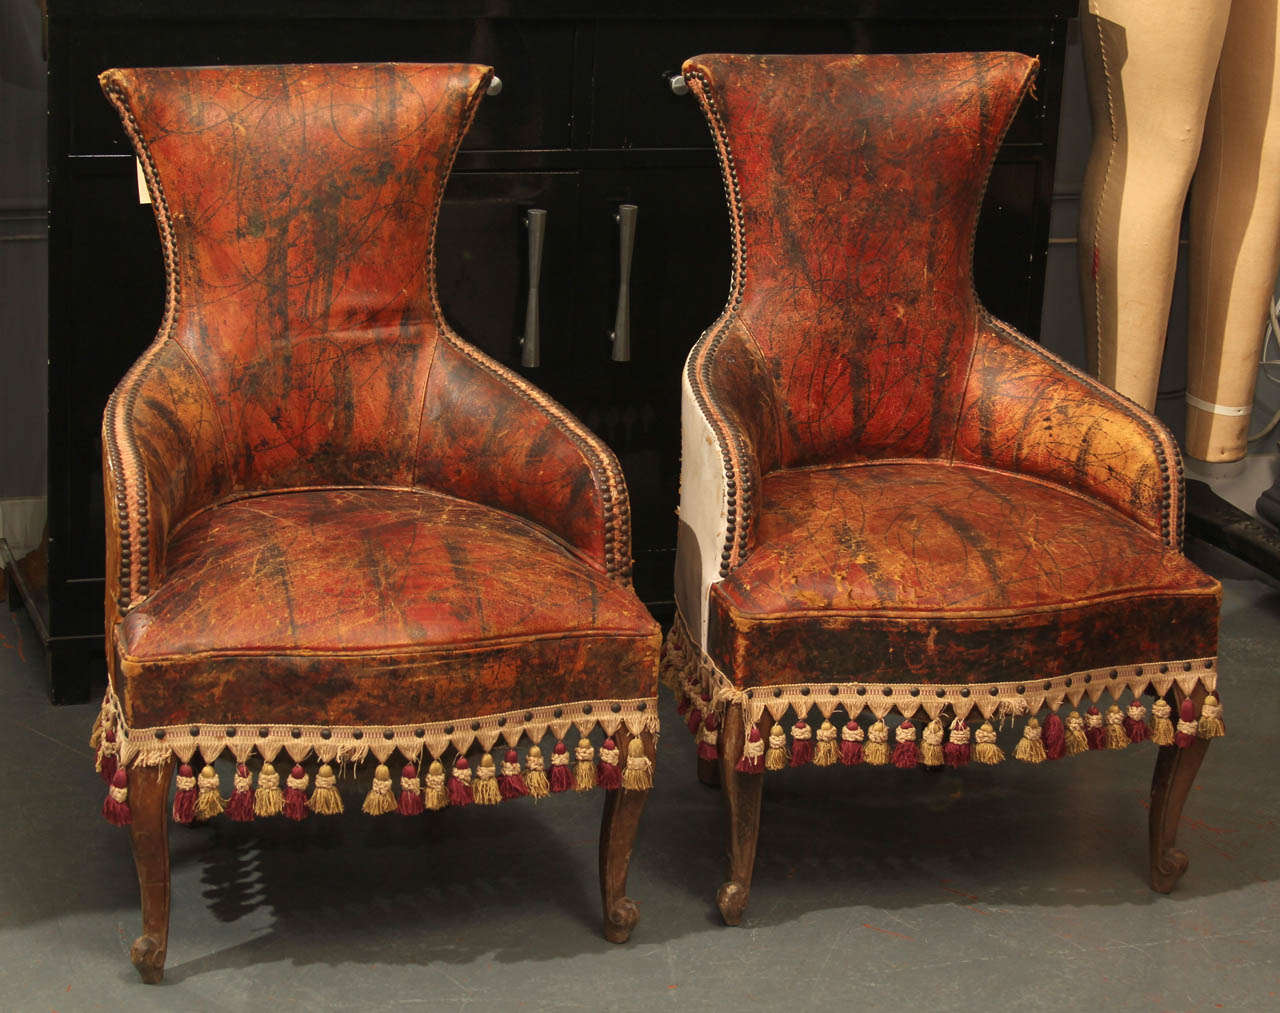 Unusual pair of curvy faux finished leather child size chairs trimmed in tassels and nailheads, as found.